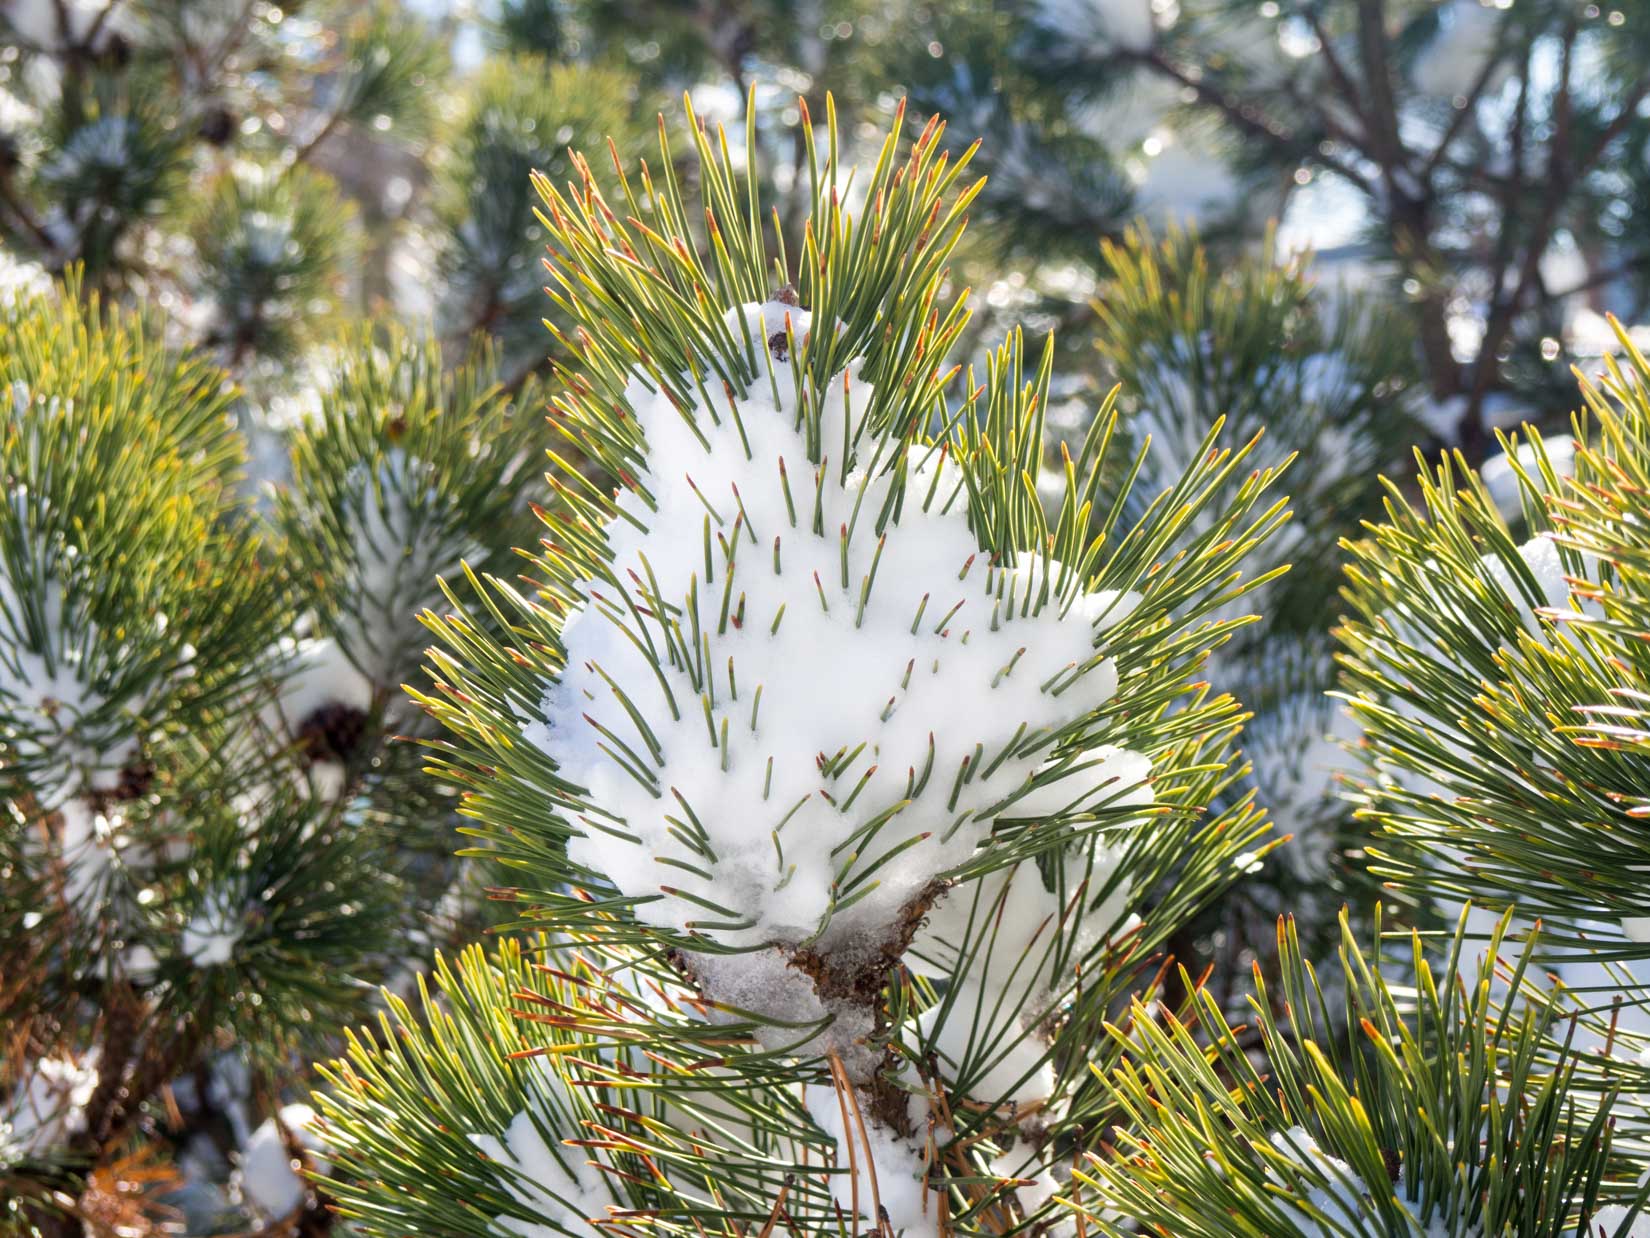 Pine Leaves Covered in Snow